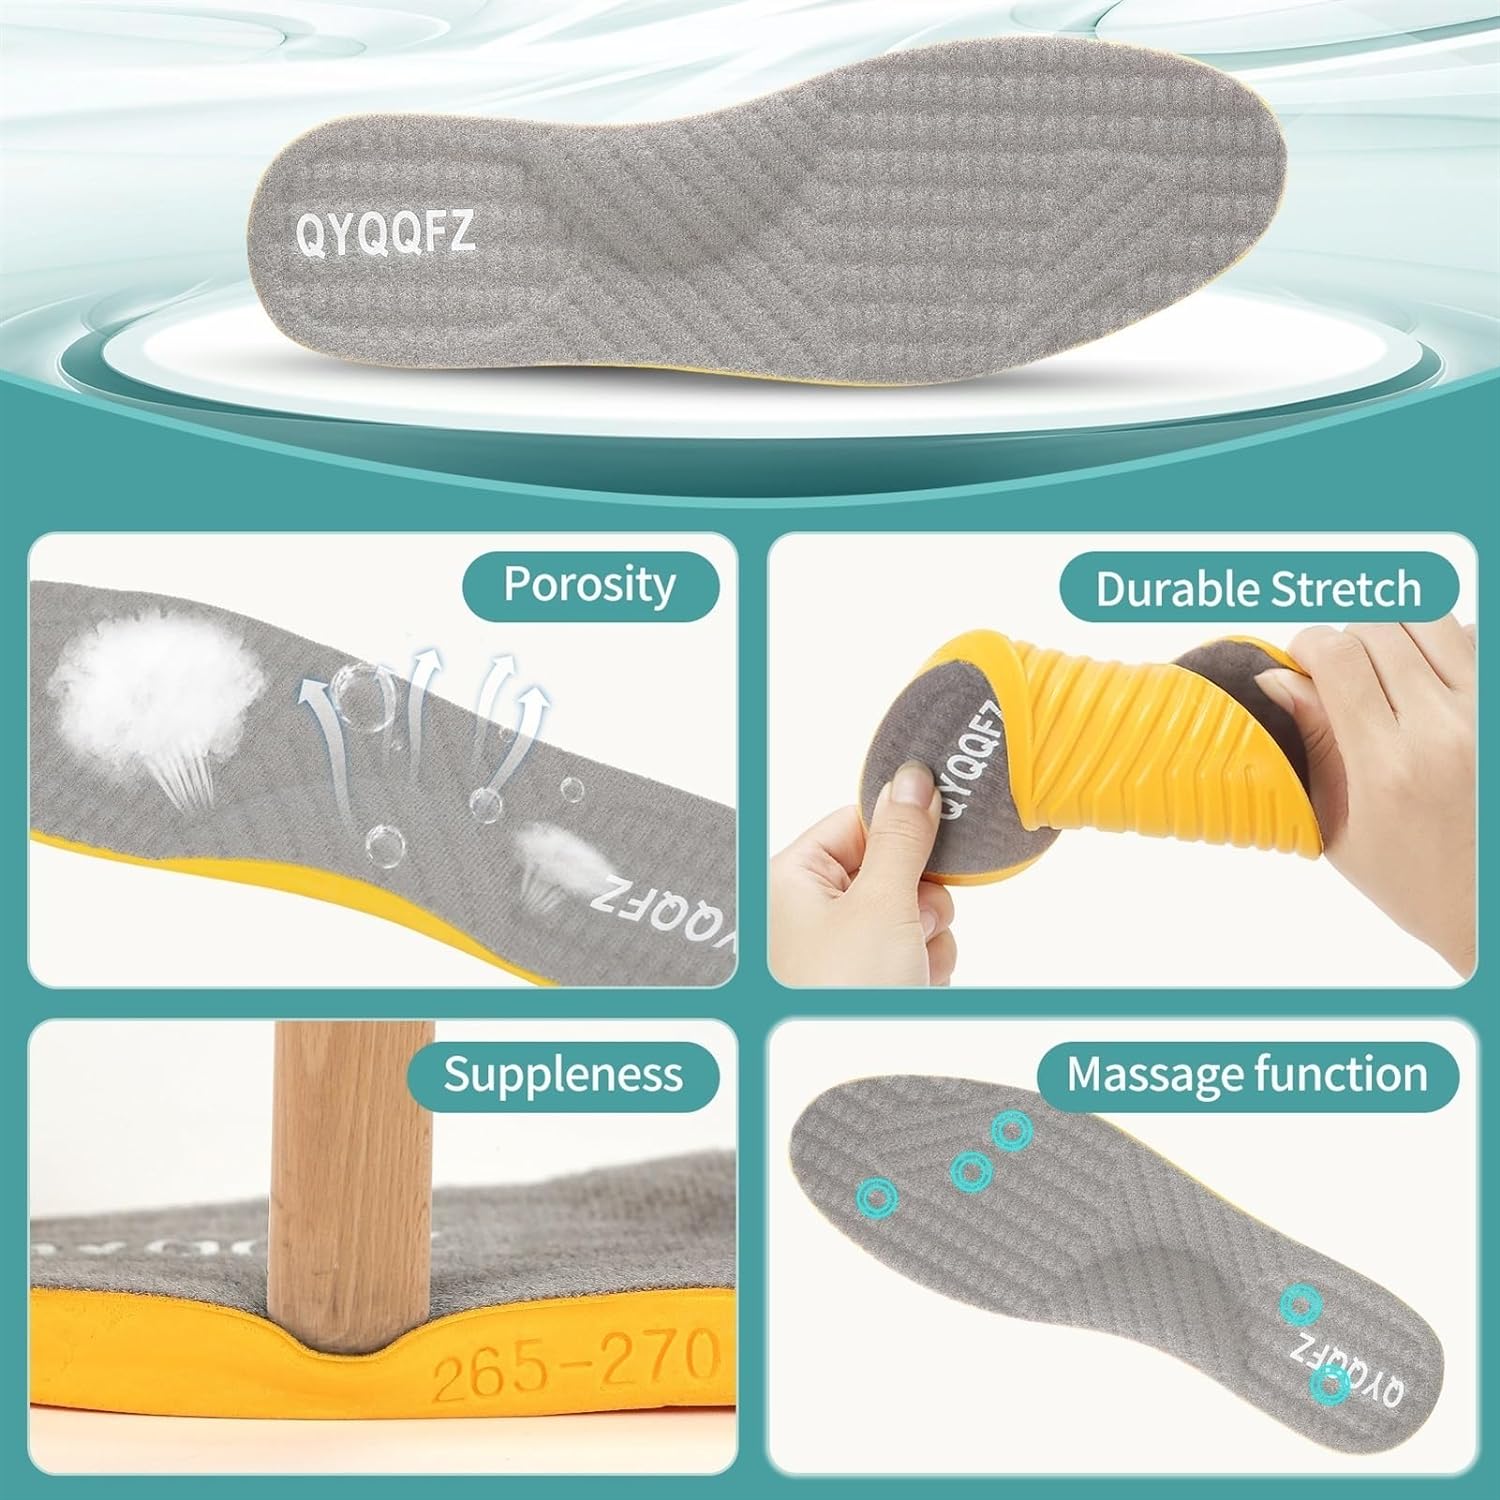 JXKWSY Orthopedic Insoles Supination Corrective Shoe Inserts for Corrective Supination, O/X Type Leg Corrective Arch Support Inserts(Size : 10.8in)